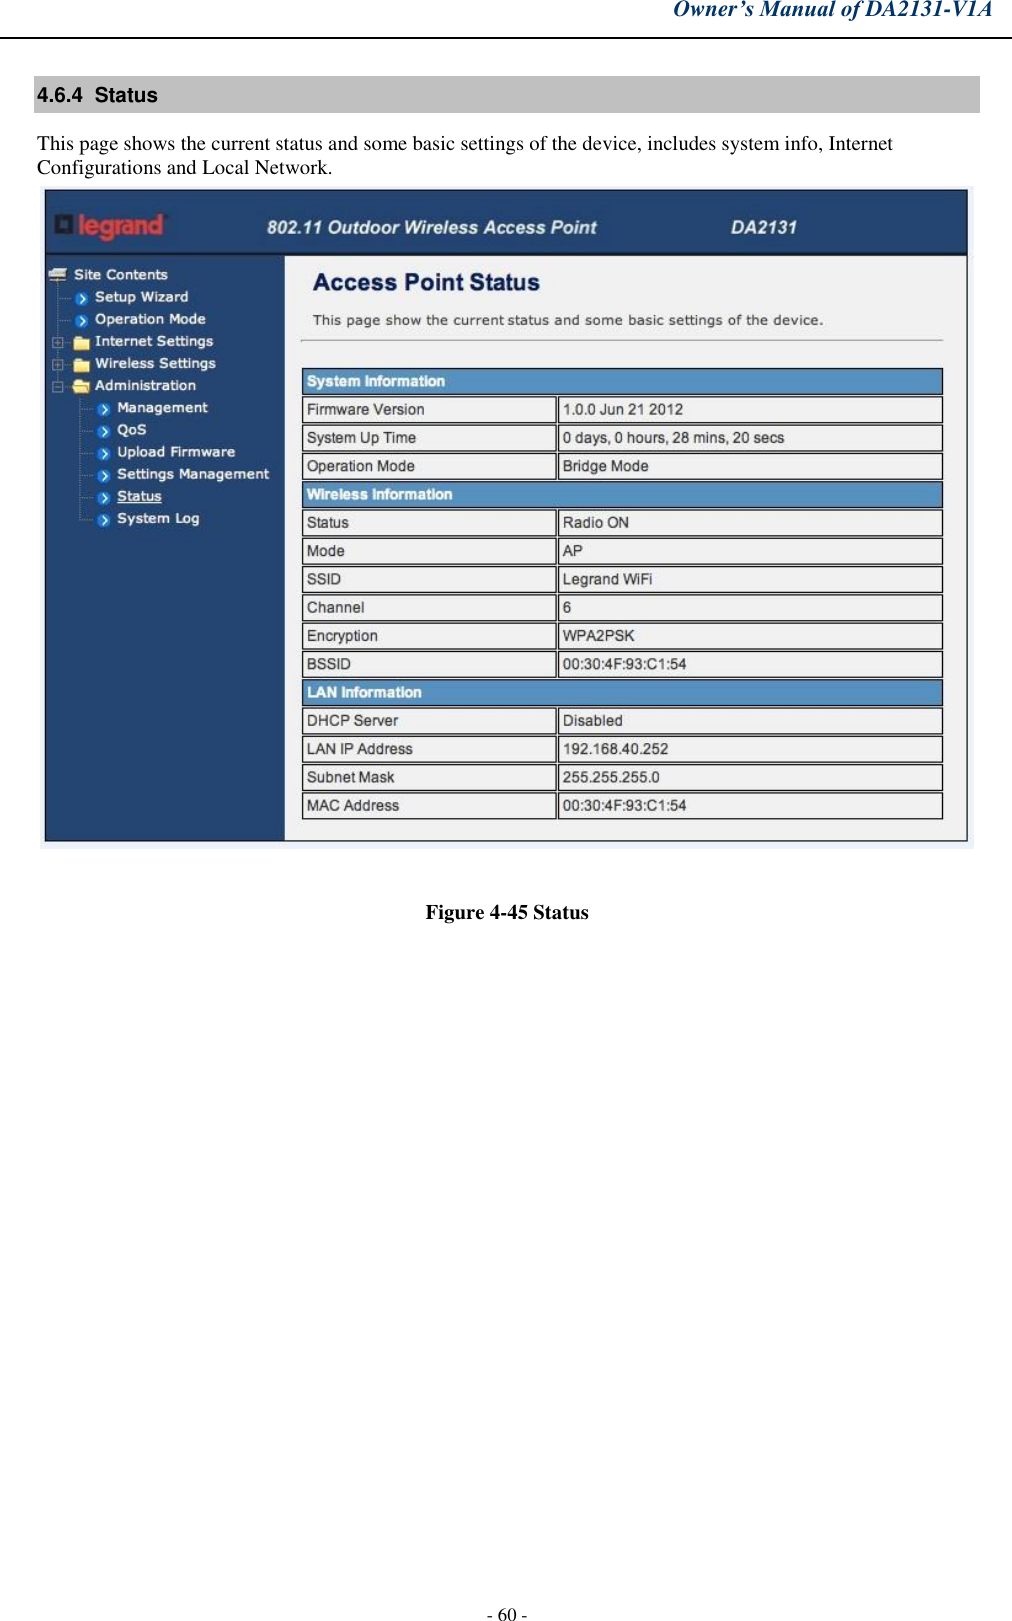 Owner’s Manual of DA2131-V1A - 60 - 4.6.4  Status This page shows the current status and some basic settings of the device, includes system info, Internet Configurations and Local Network. Figure 4-45 Status 